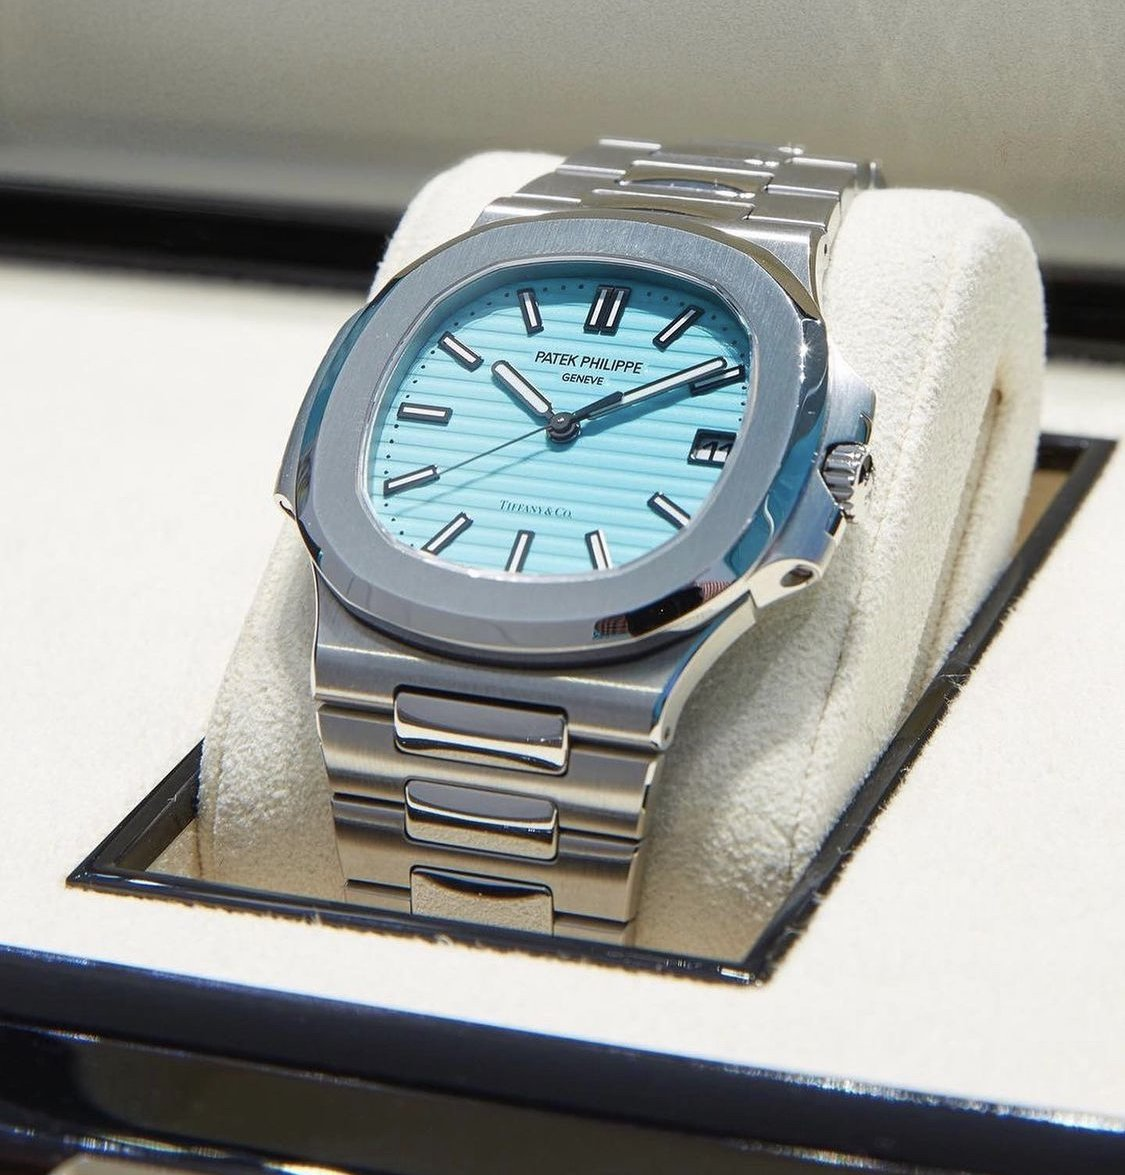 Rare Patek Philippe Nautilus 5711 for Tiffany & Co.: A Timepiece of ...